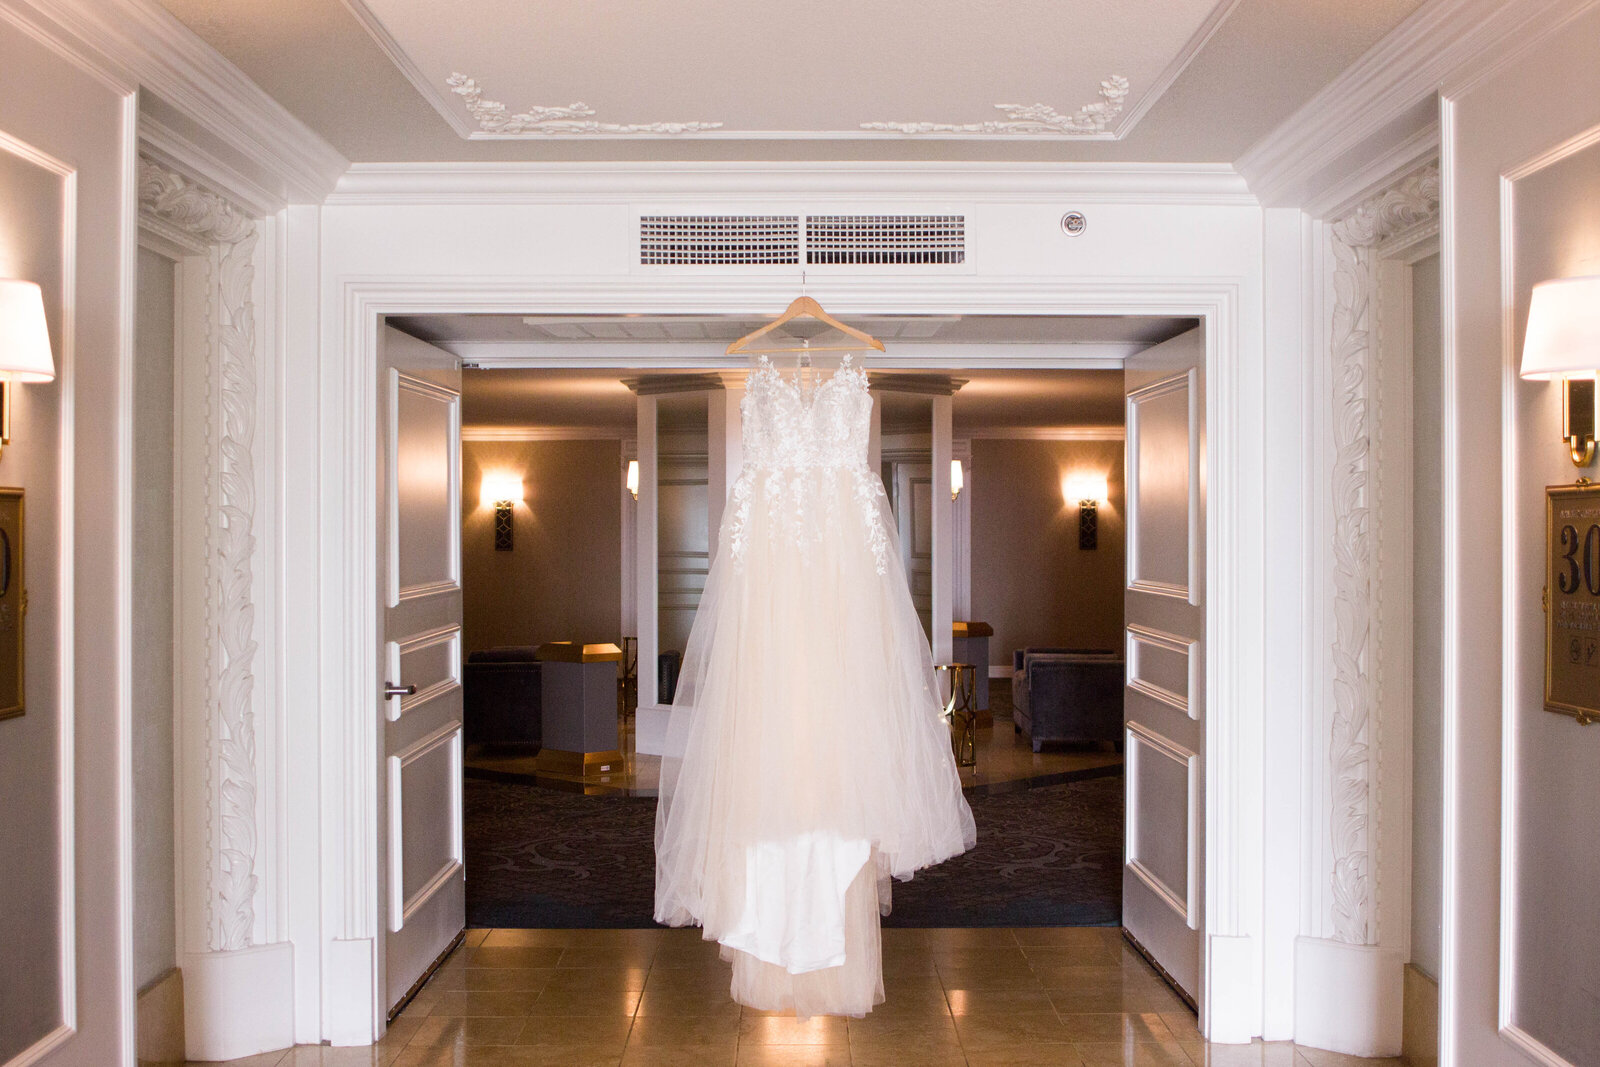 A lace wedding dress hanging in a doorframe.